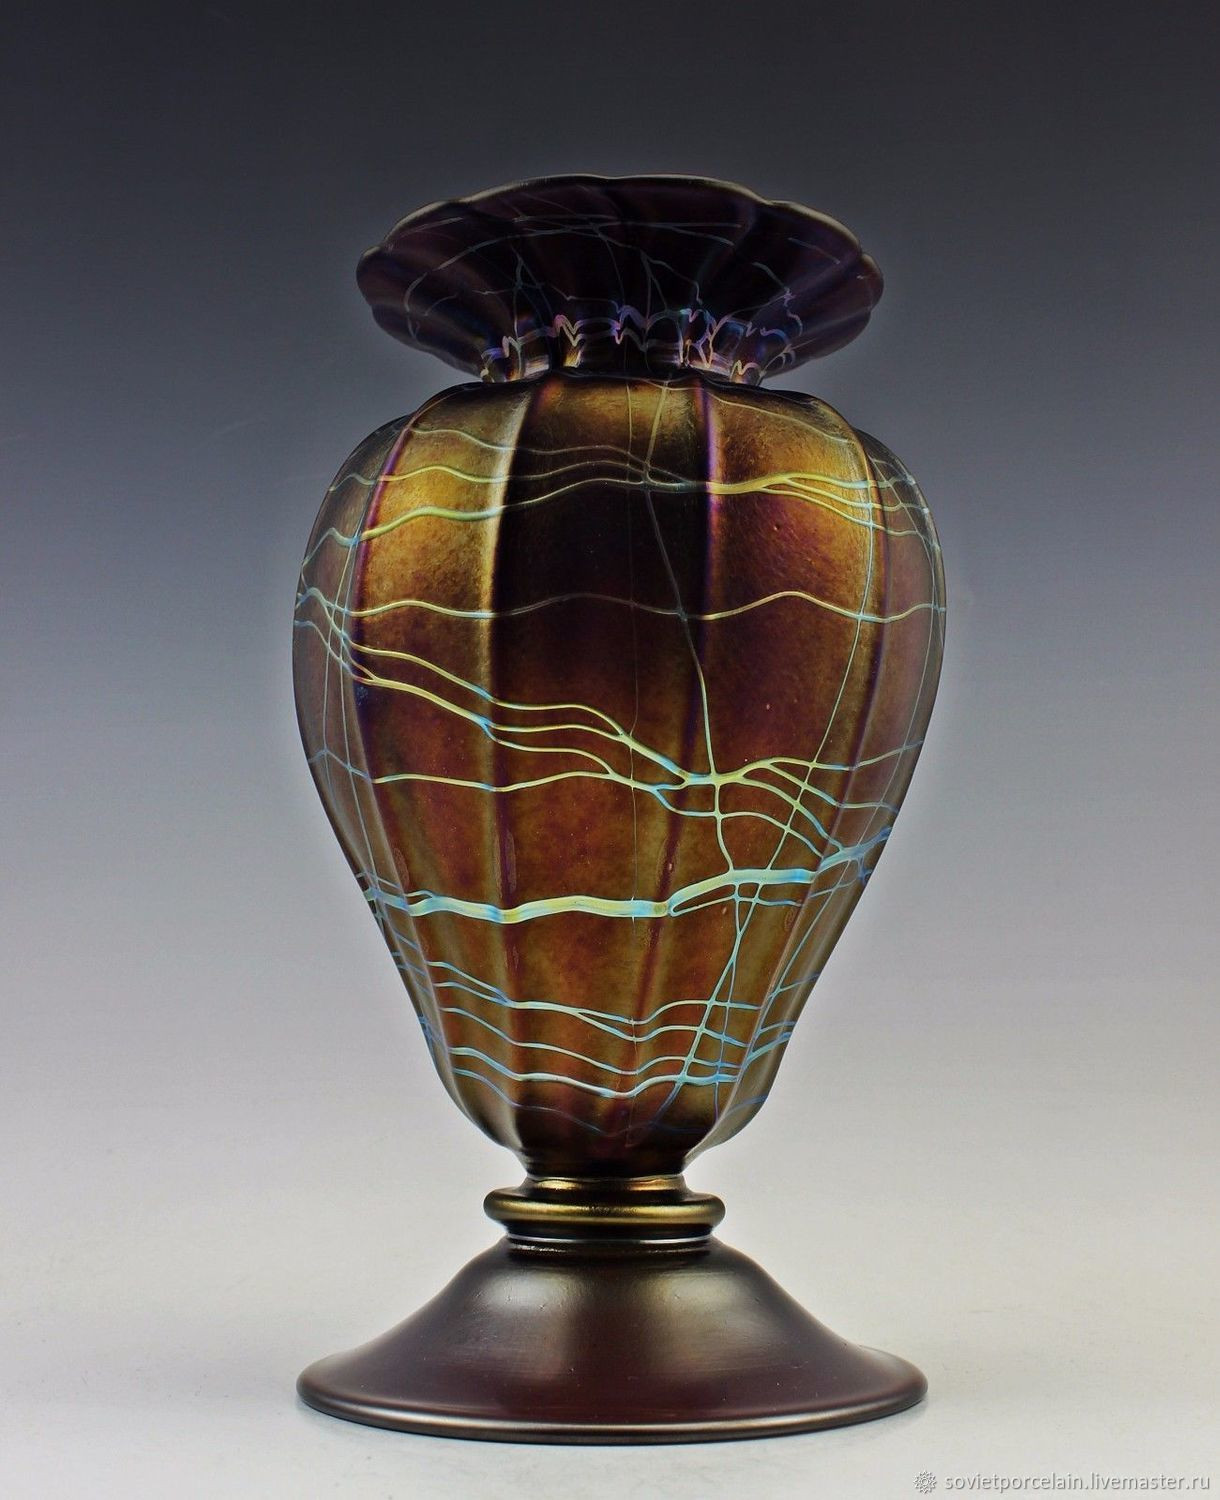 10 Spectacular Multi Colored Vases 2024 free download multi colored vases of vintage colored glass vase image vase colored glass iridescence in vase colored glass iridescence letts art deco shop online on